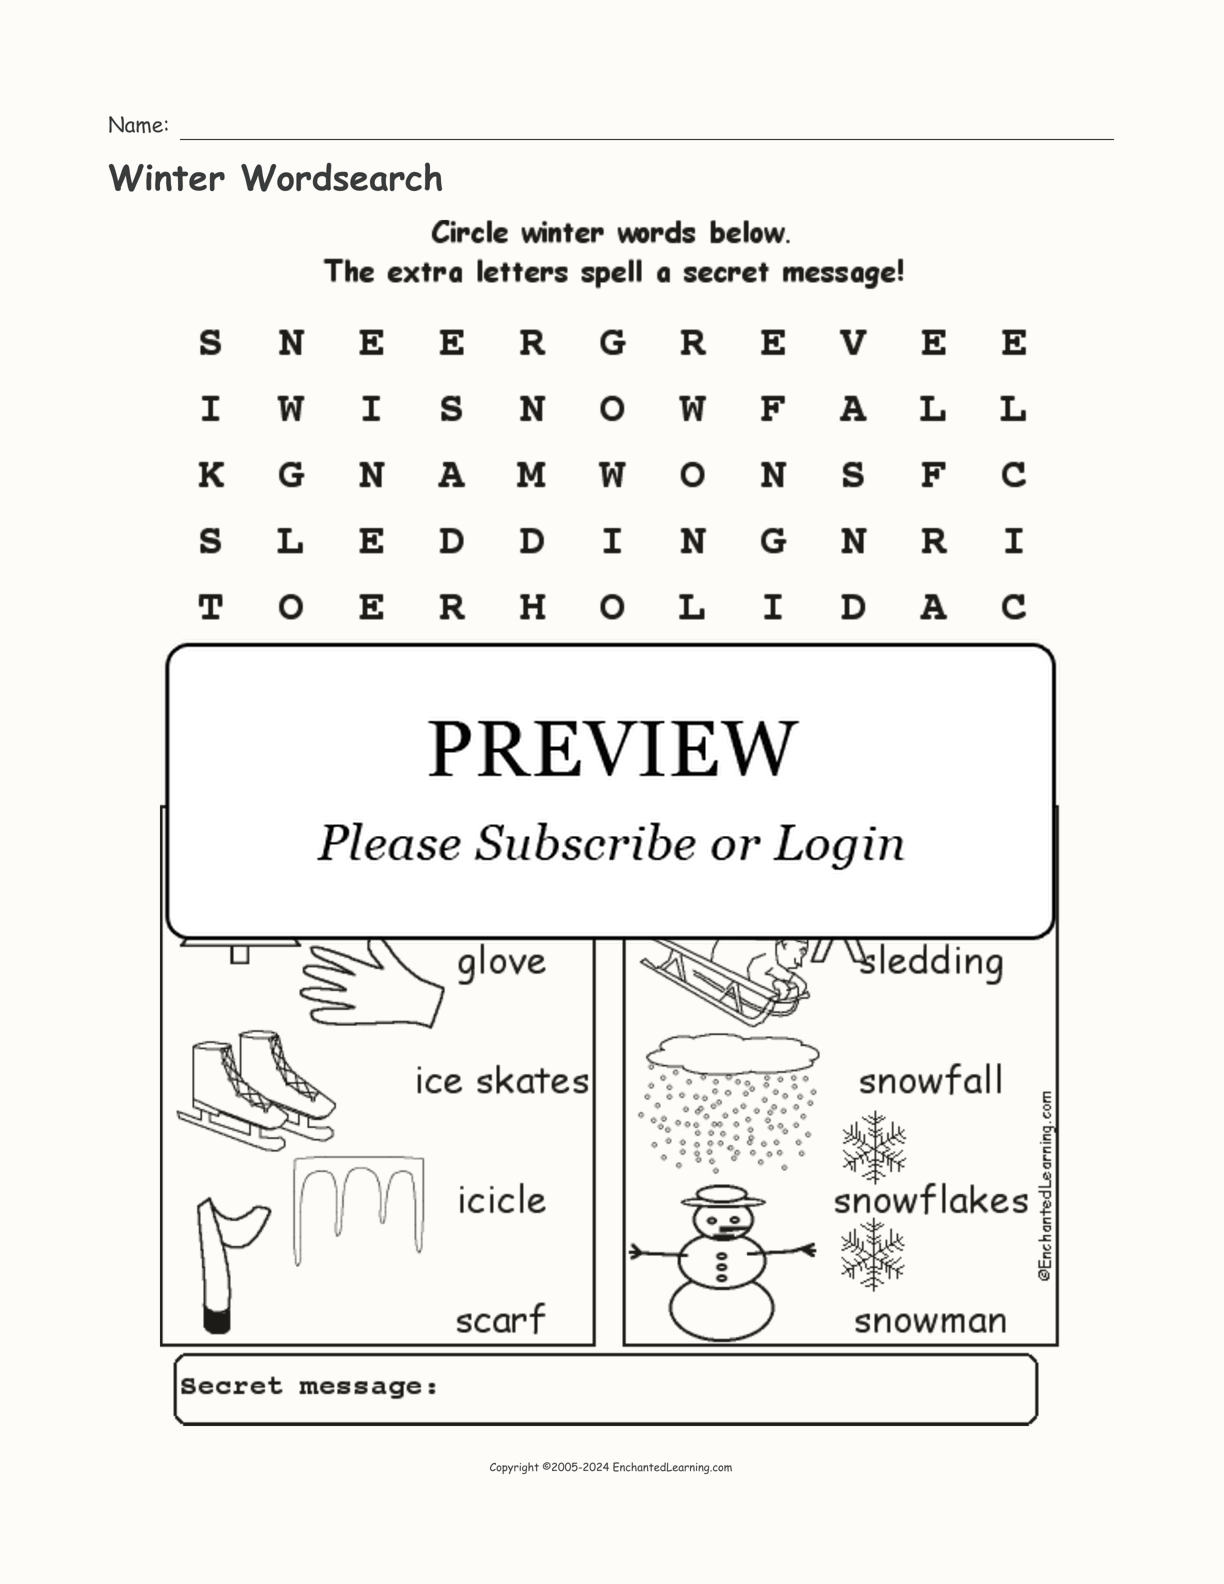 Winter Wordsearch interactive worksheet page 1